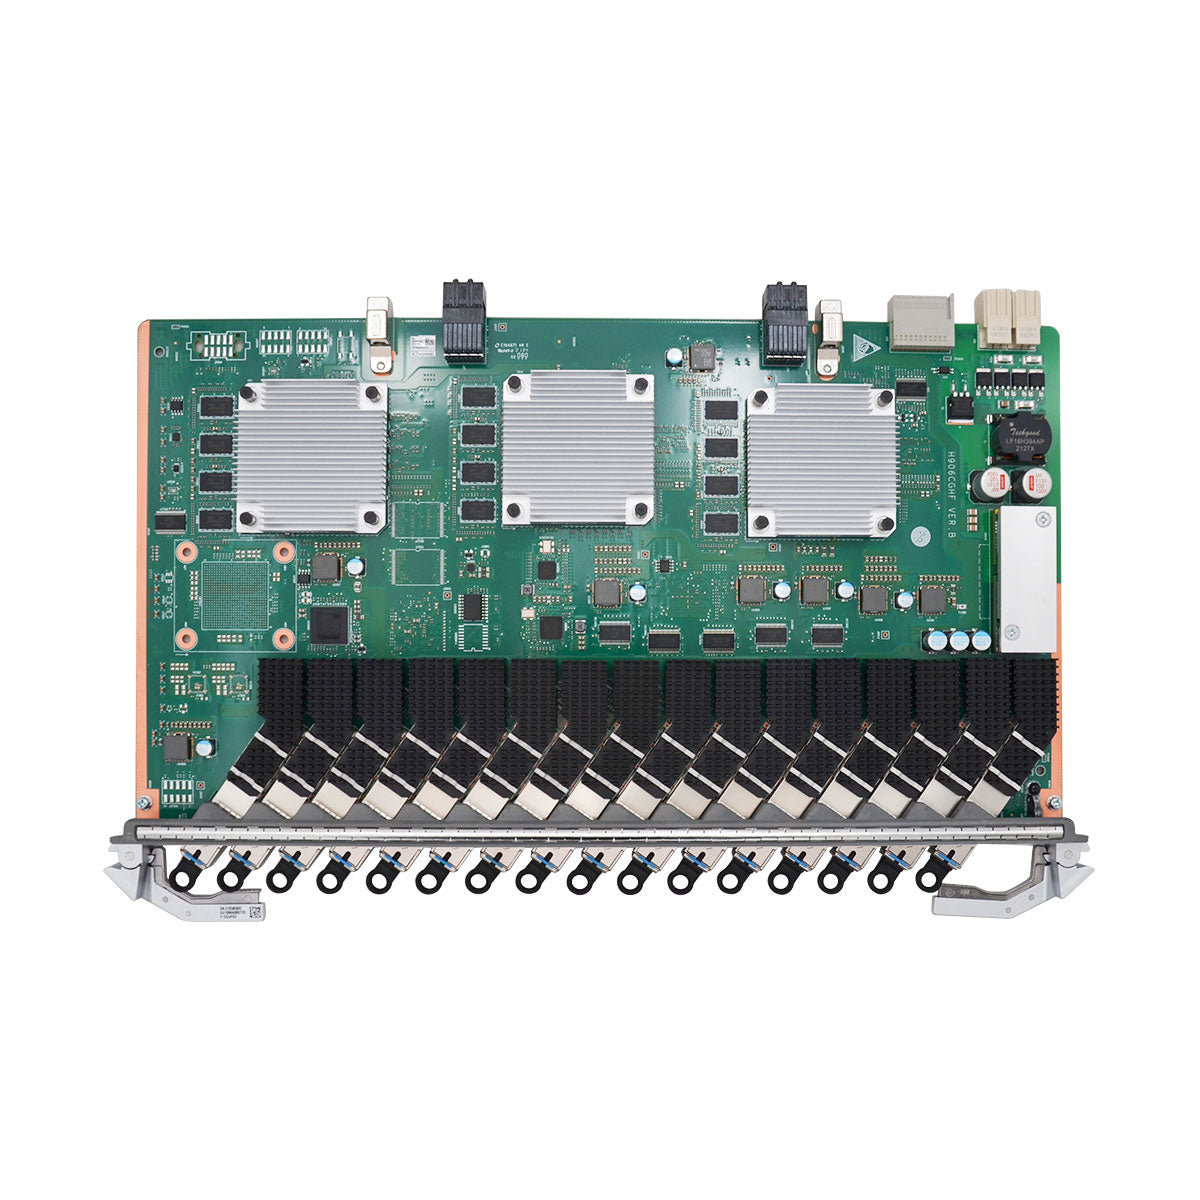 Huawei H906CGUF 16-port XG-PON and GPON combo Board for MA5800 series OLT